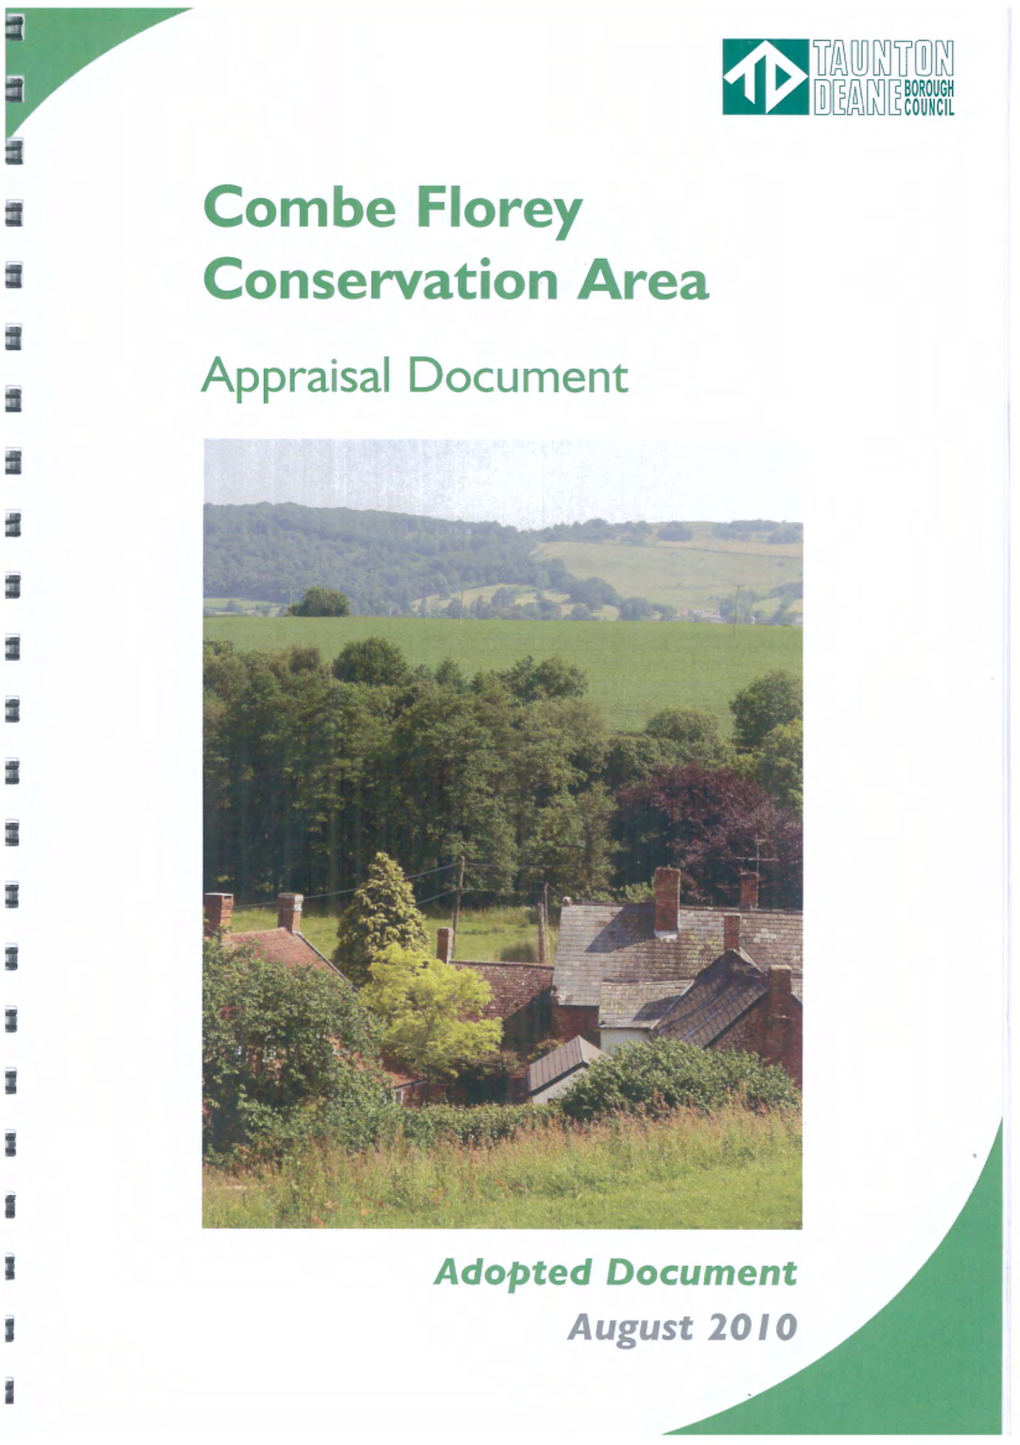 Combe Florey Conservation Area Appraisal Was Researched and Written During June 2009, and Revised Following Consultation in April 2010